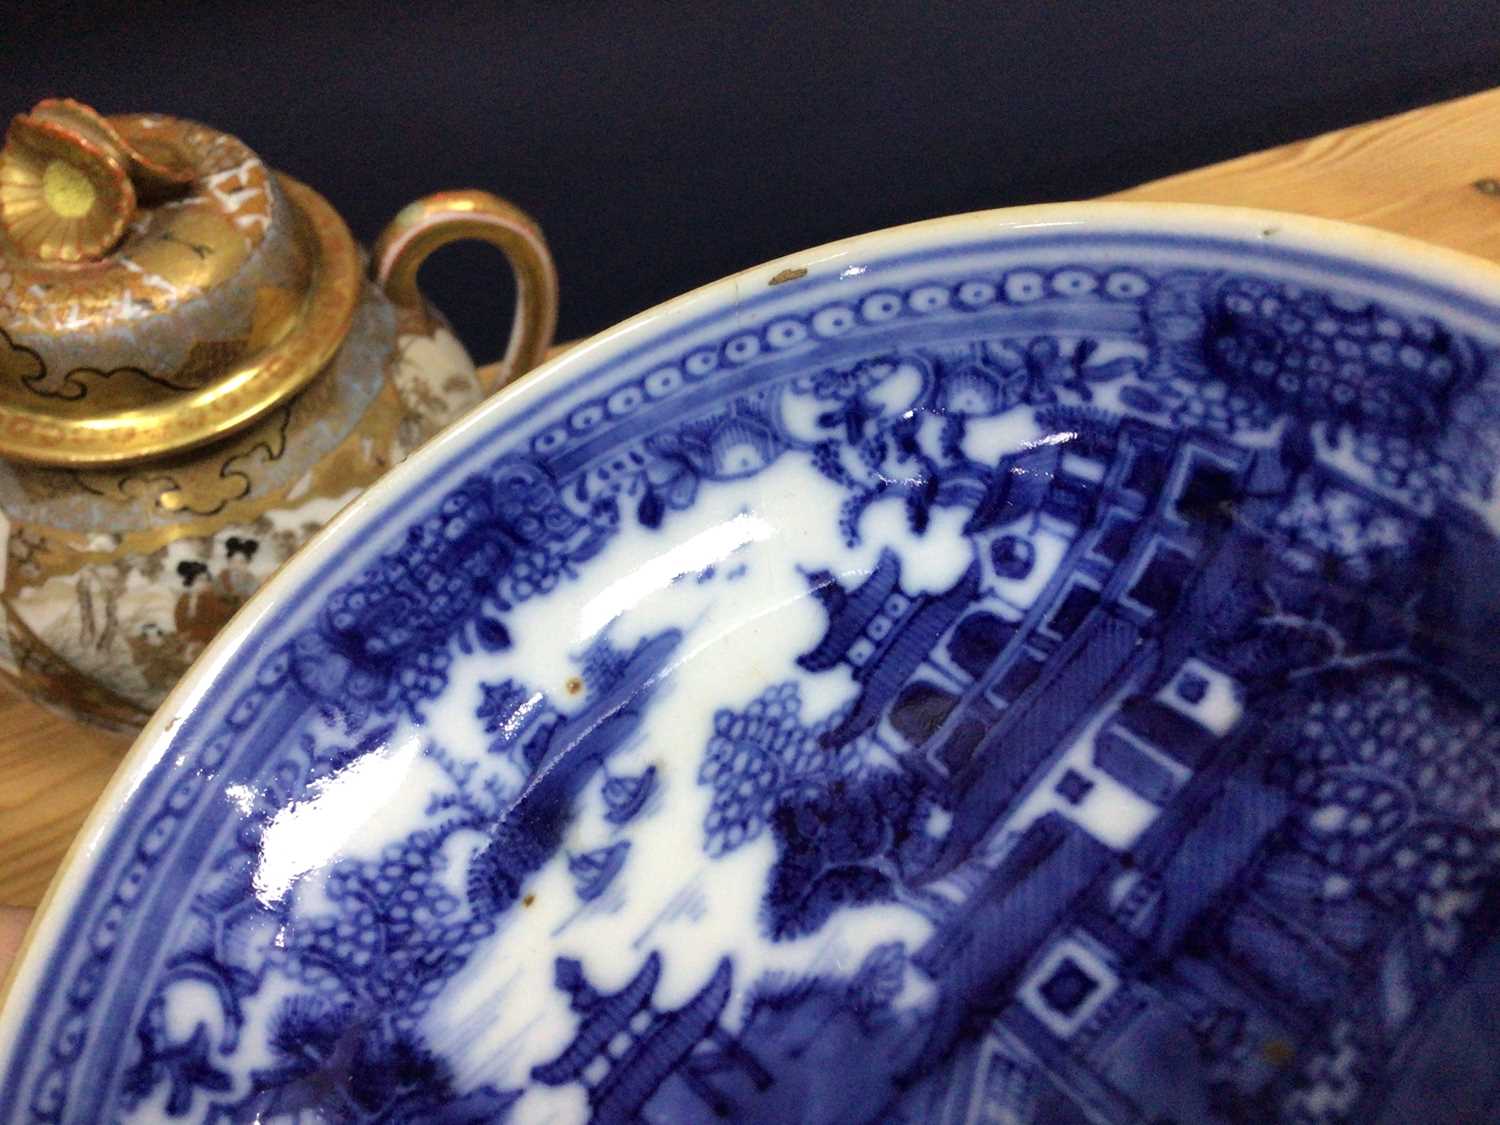 GROUP OF 18TH CENTURY CHINESE BLUE AND WHITE PORCELAIN, QIANLONG PERIOD 1736 - 1795 - Image 3 of 8